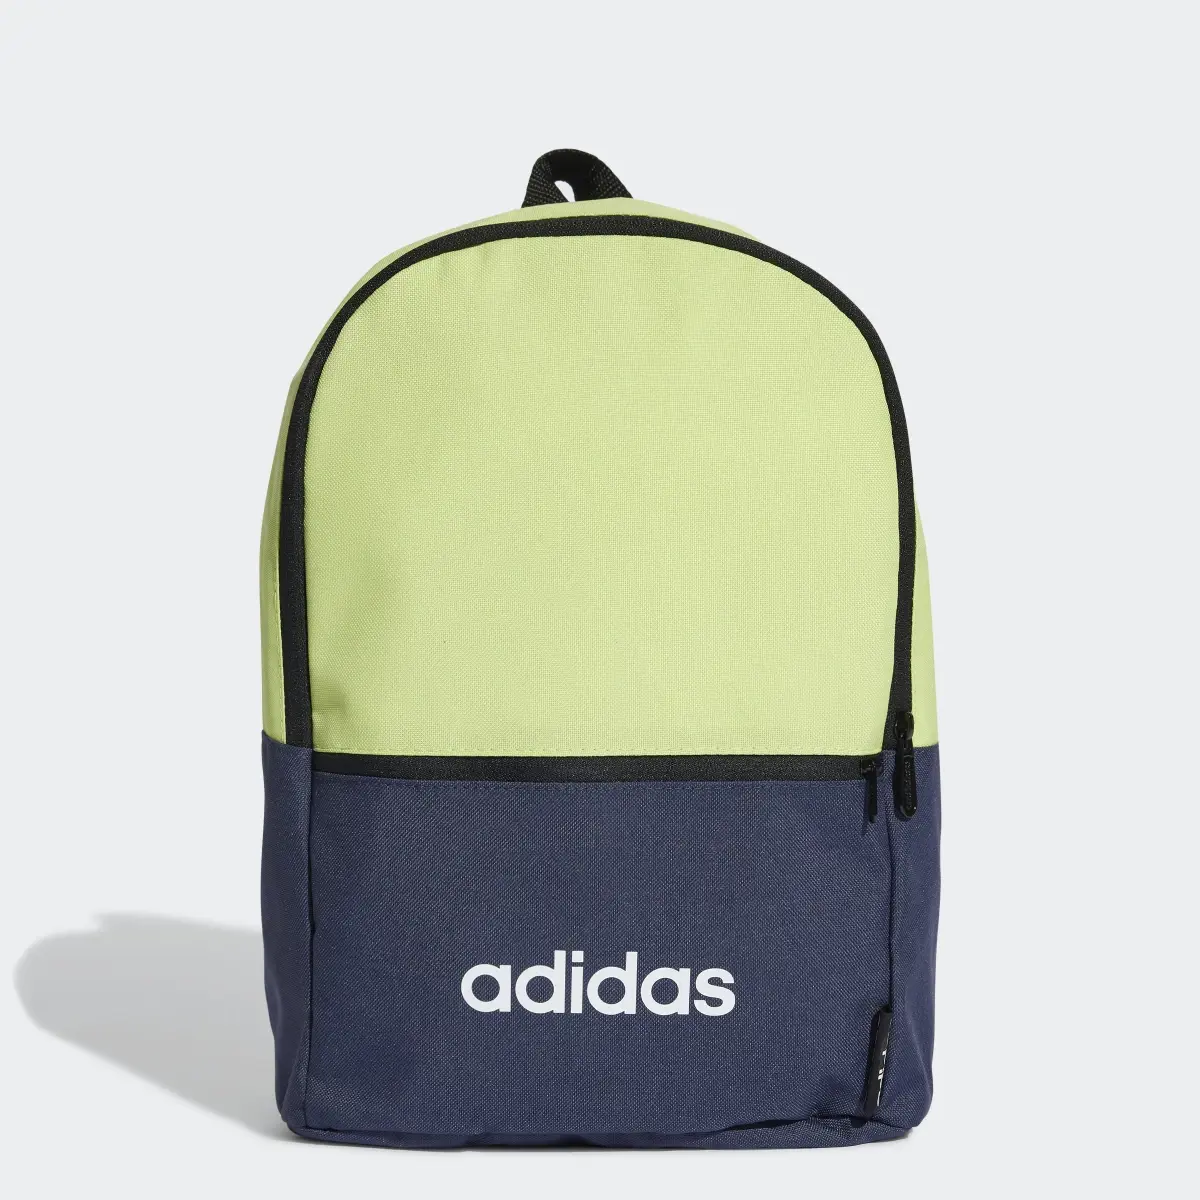 Adidas CLASSIC BACKPACK. 1